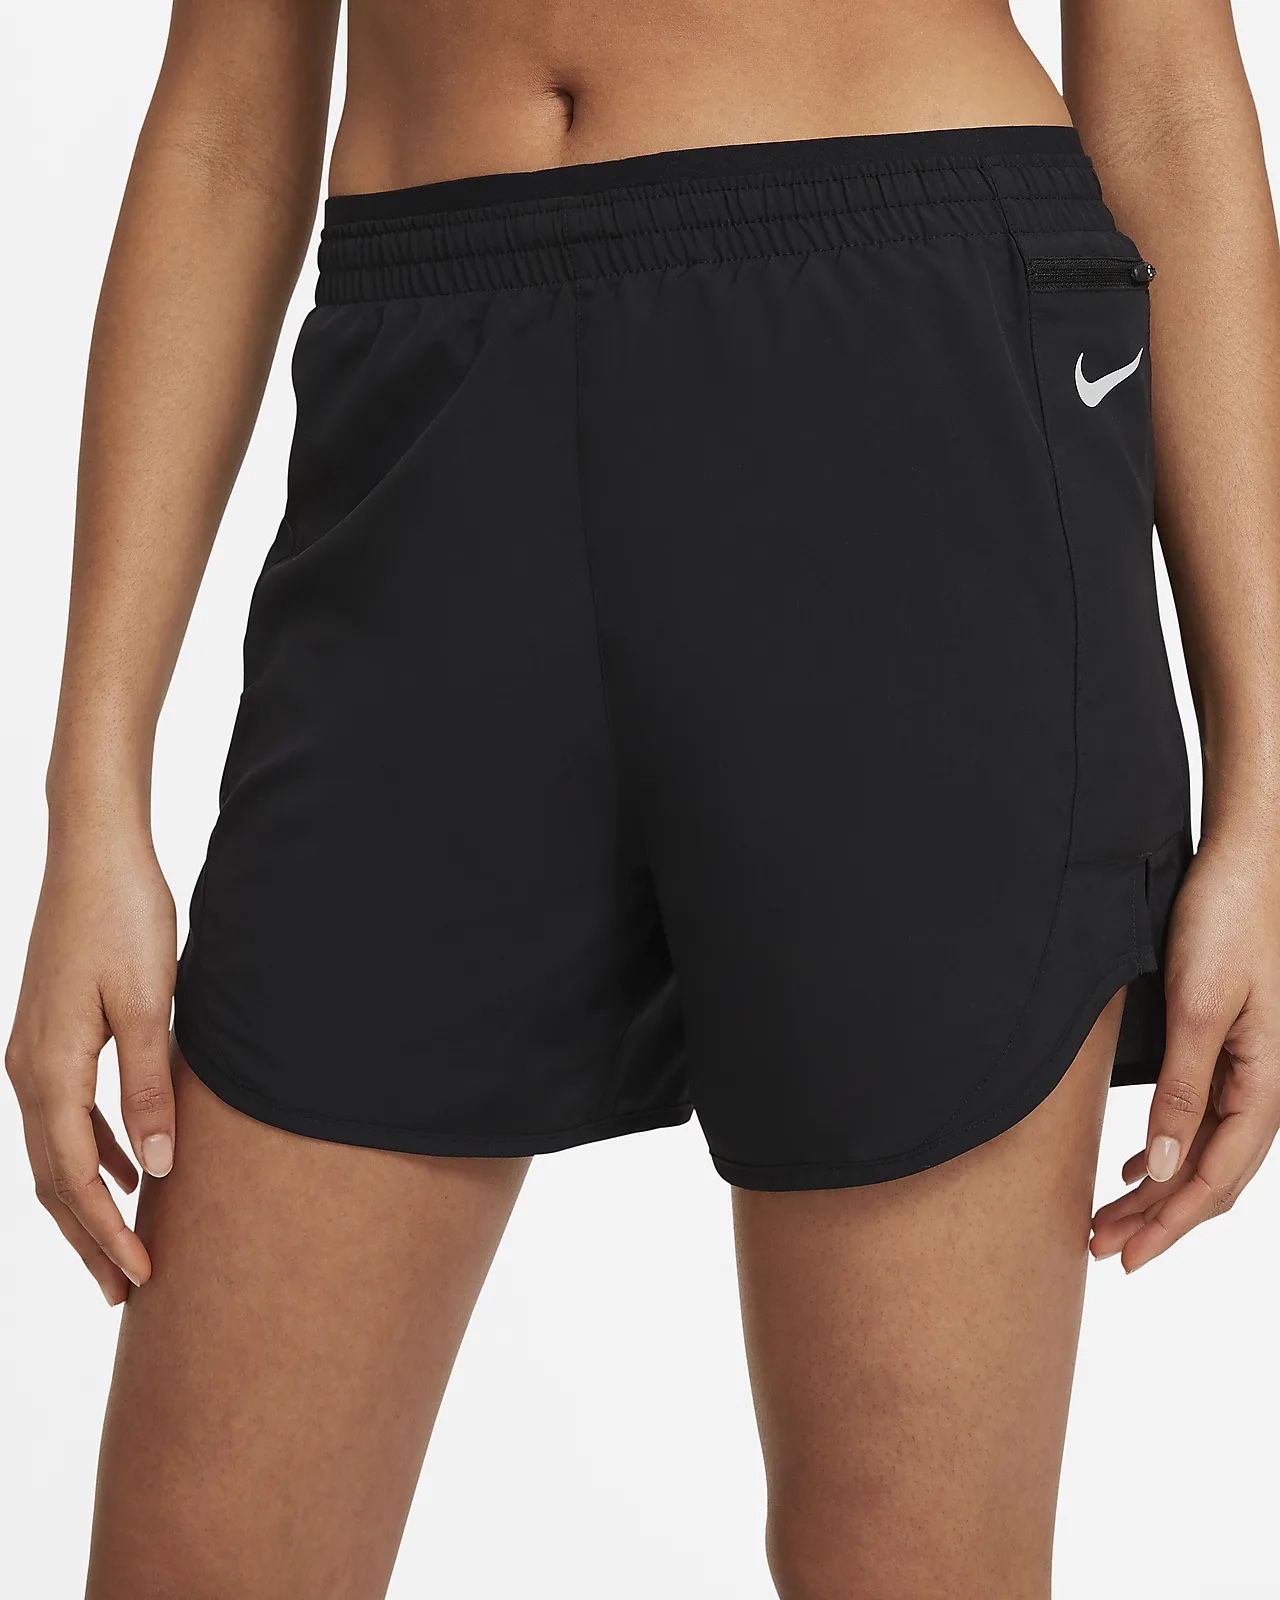 Nike Tempo Luxe Running Shorts - Black (CZ9576 010) Size Small Women’s ...